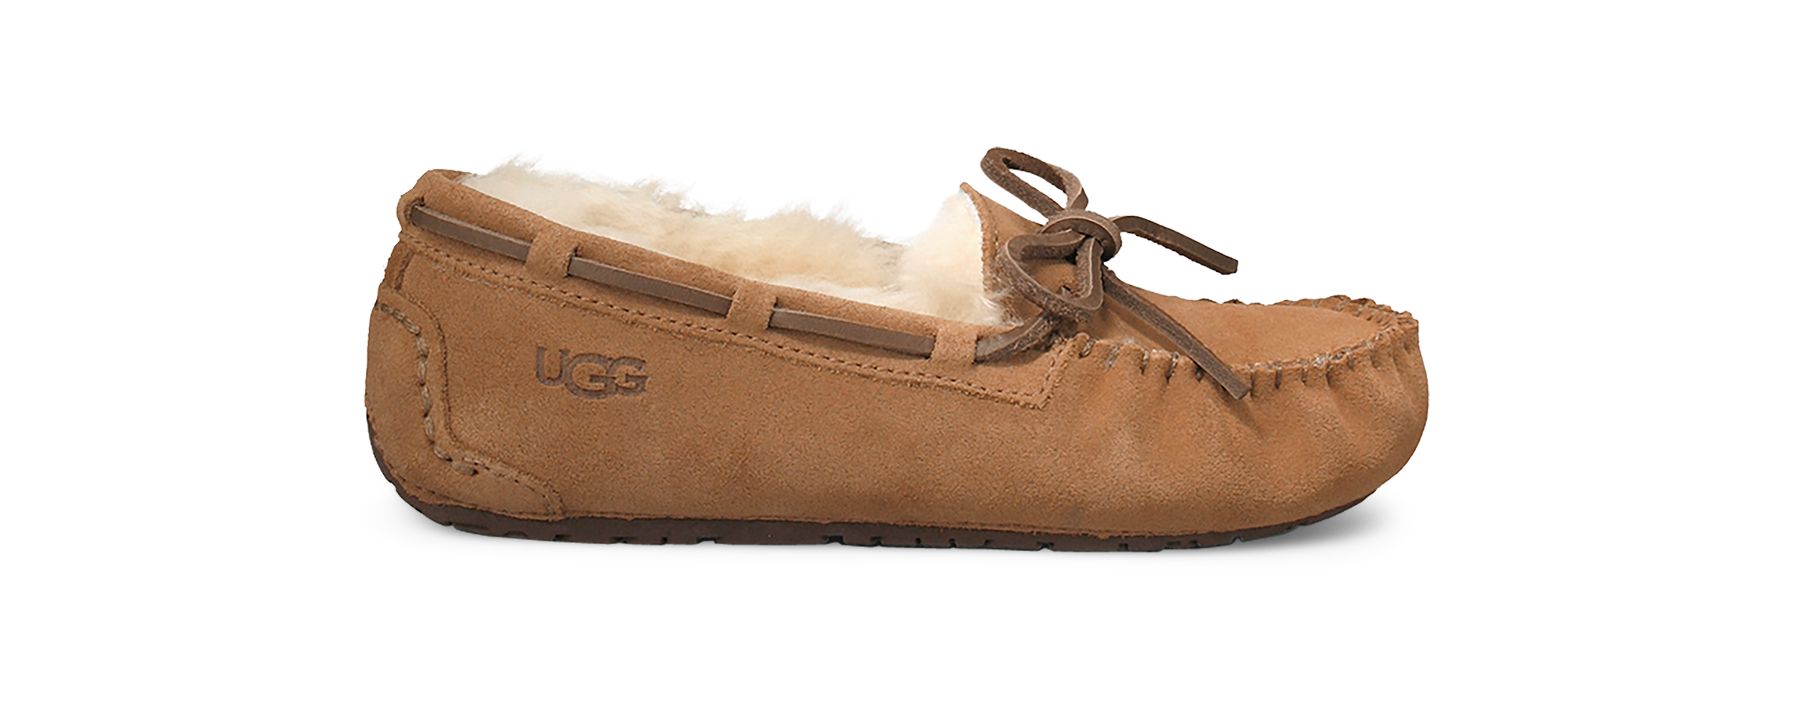 UGG Toddlers' Dakota Slipper Suede Slippers in Brown, Size 1 | UGG (US)